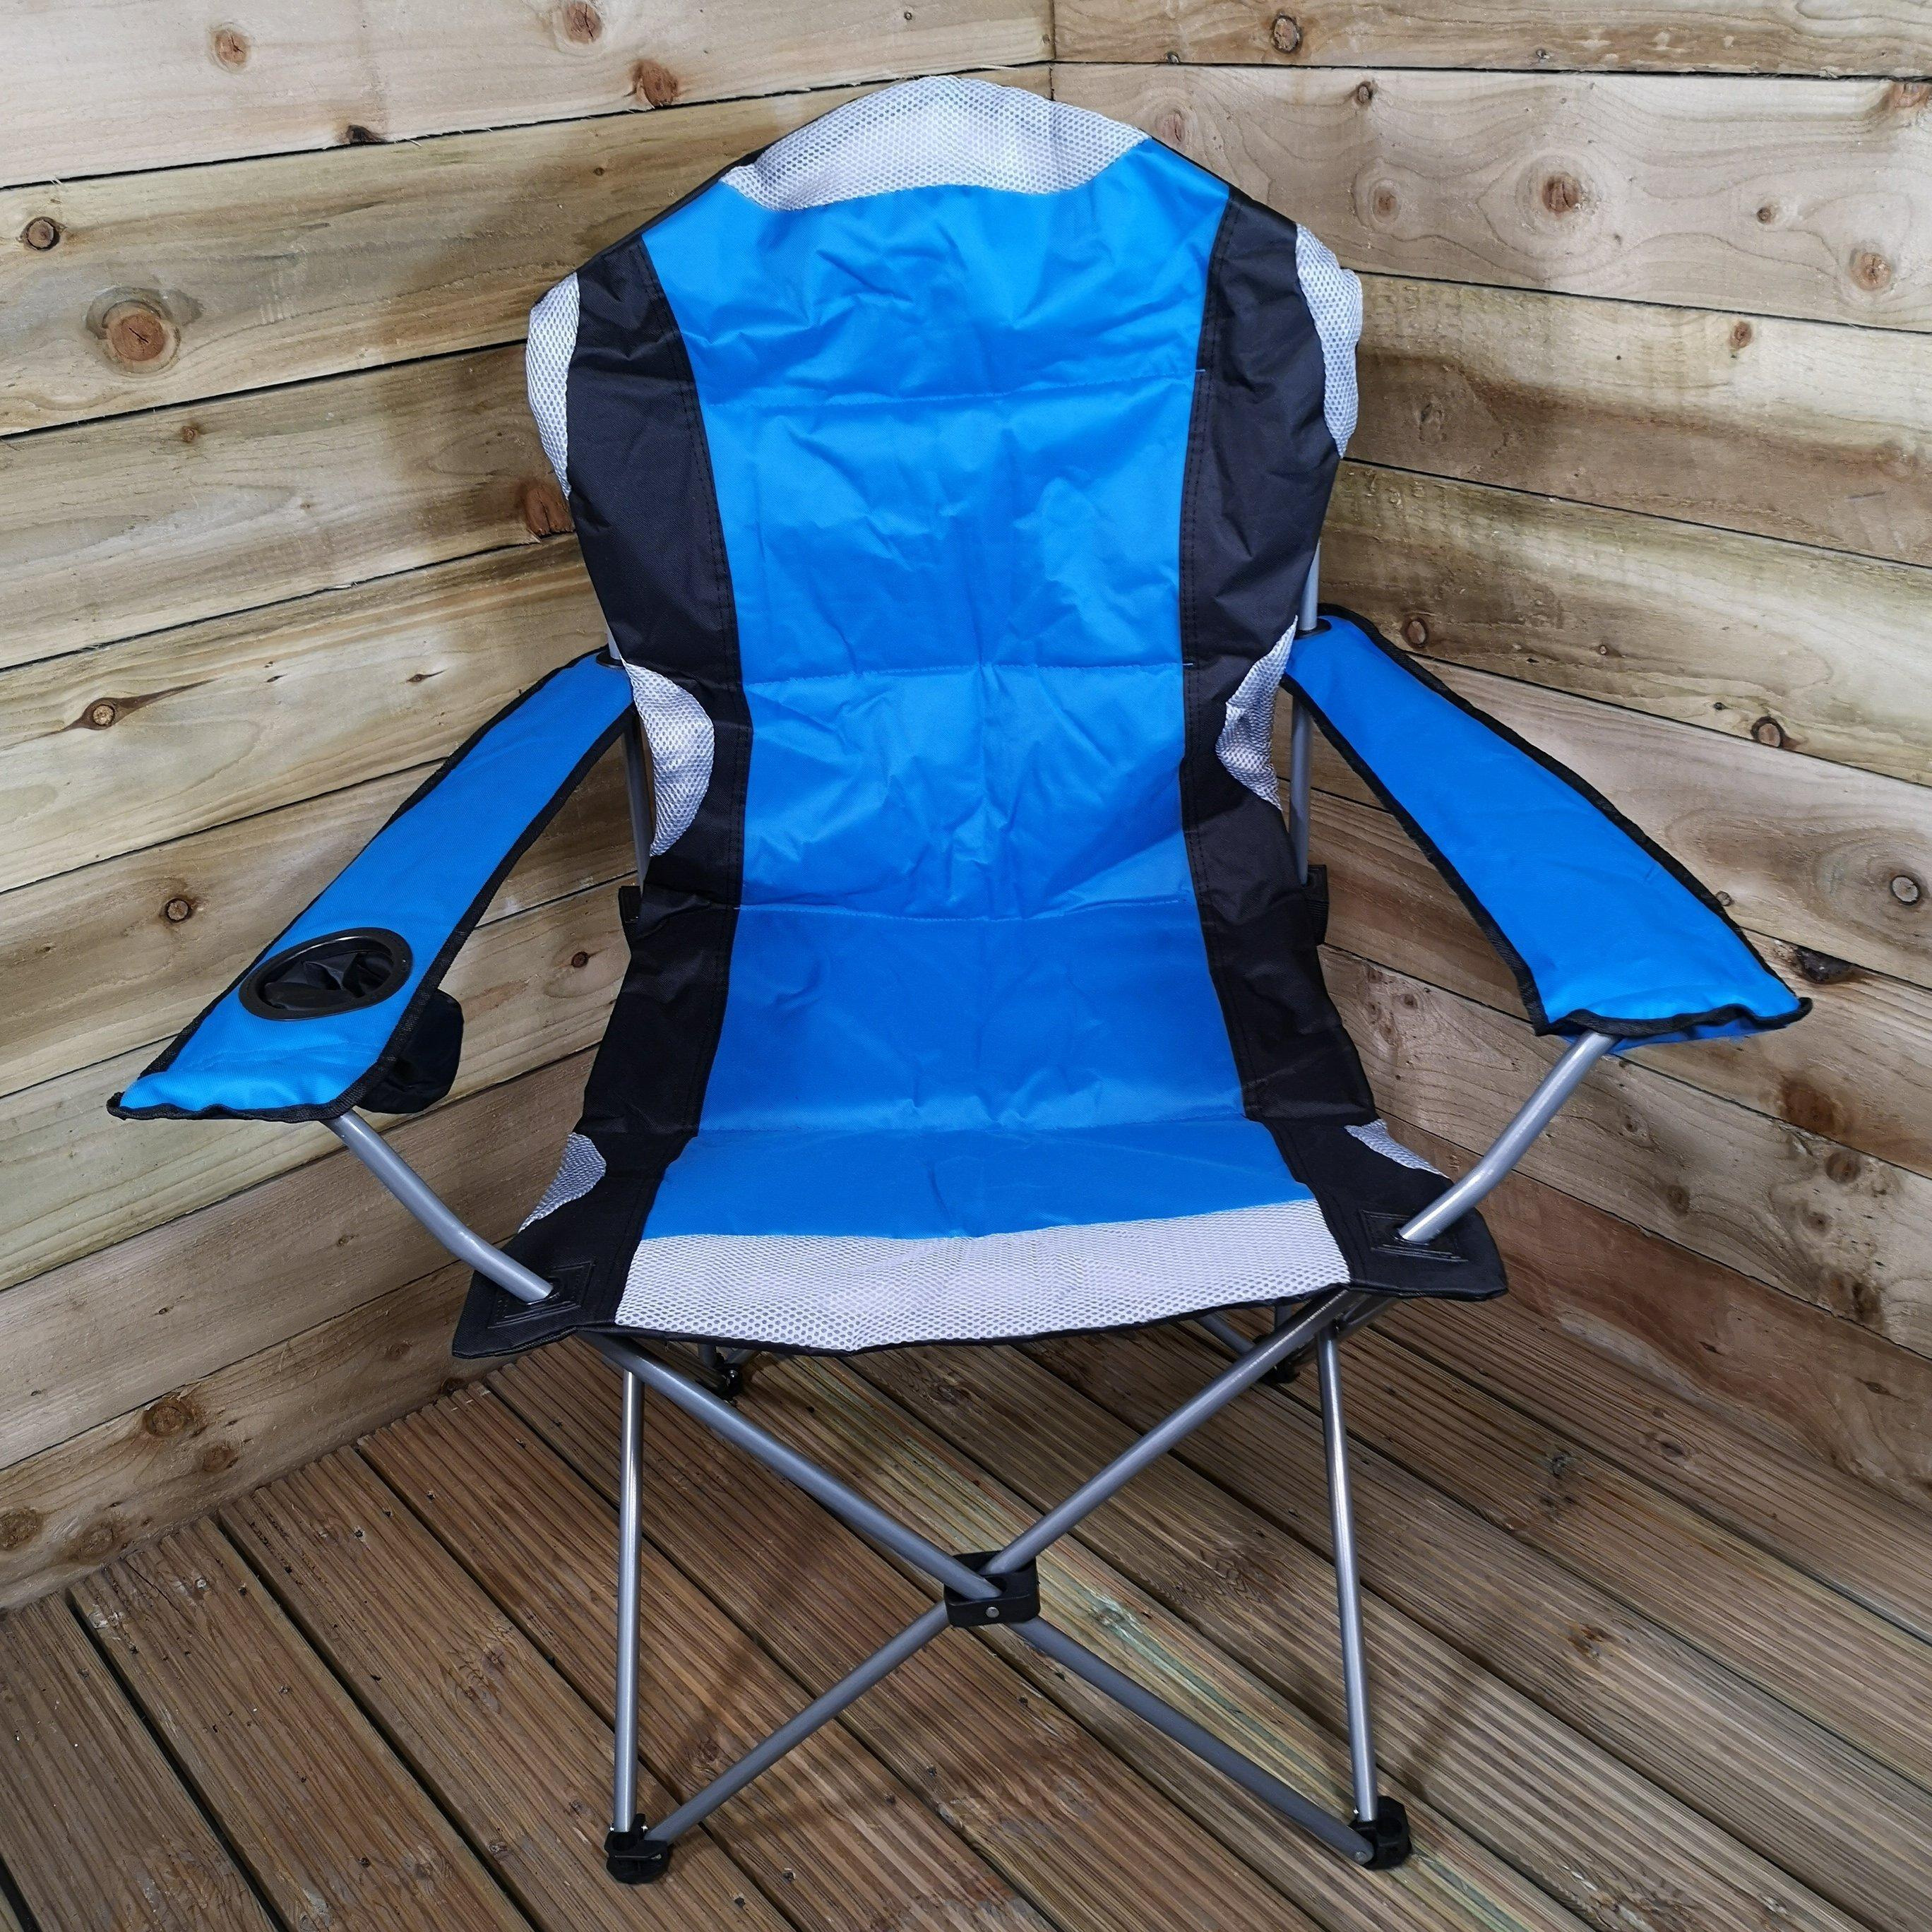 Luxury Padded High Back Folding Outdoor / Camping / Fishing Chair in Blue - image 1